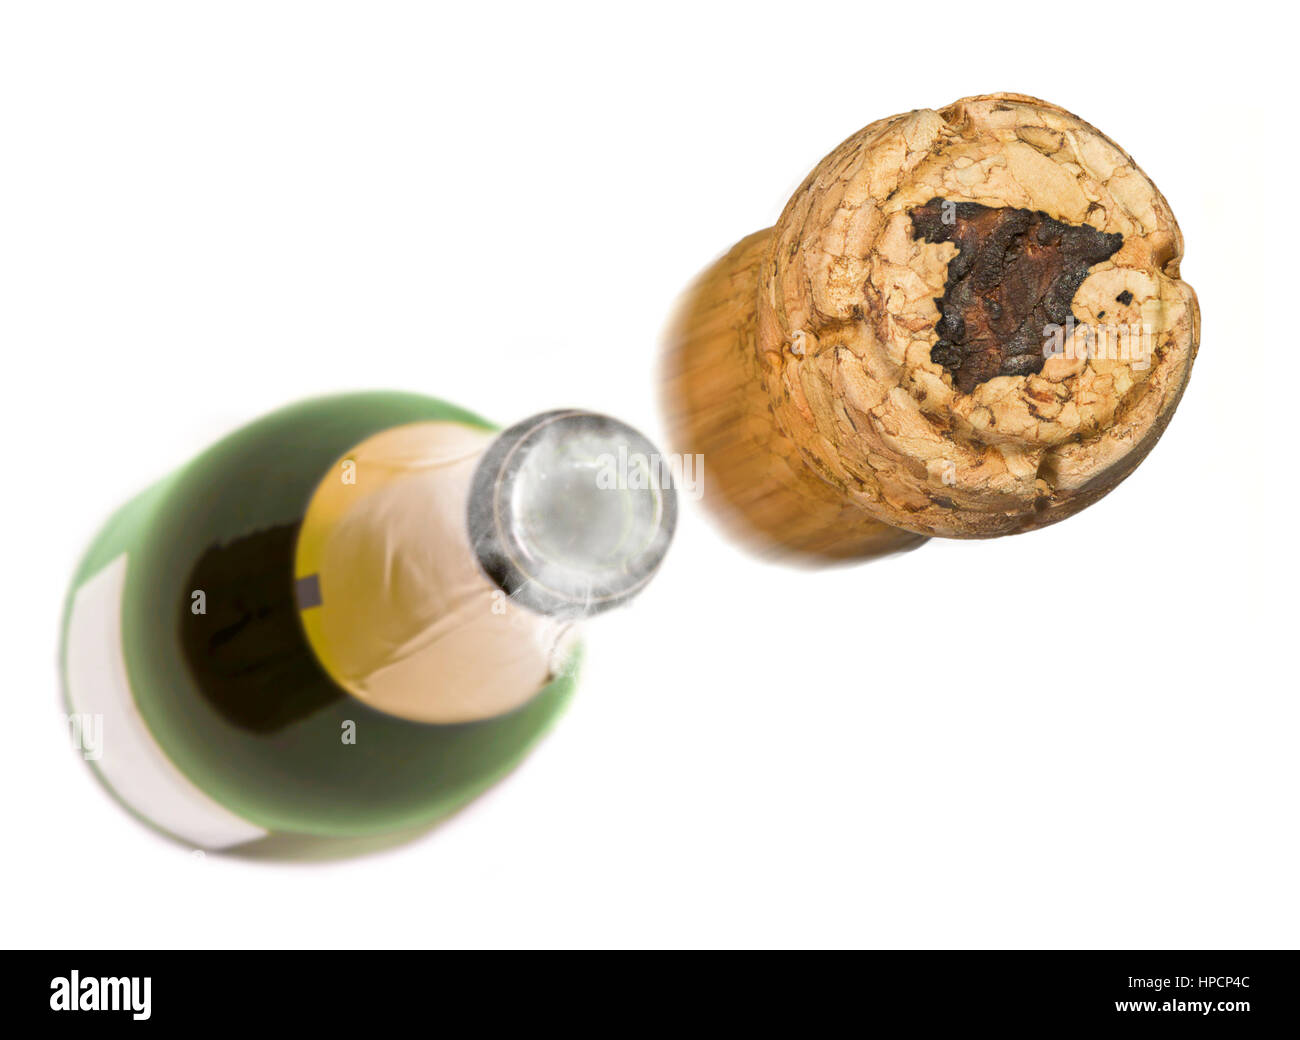 Champagne cork with the shape of Spain burnt in and bottle of champagne in the back.(series) Stock Photo